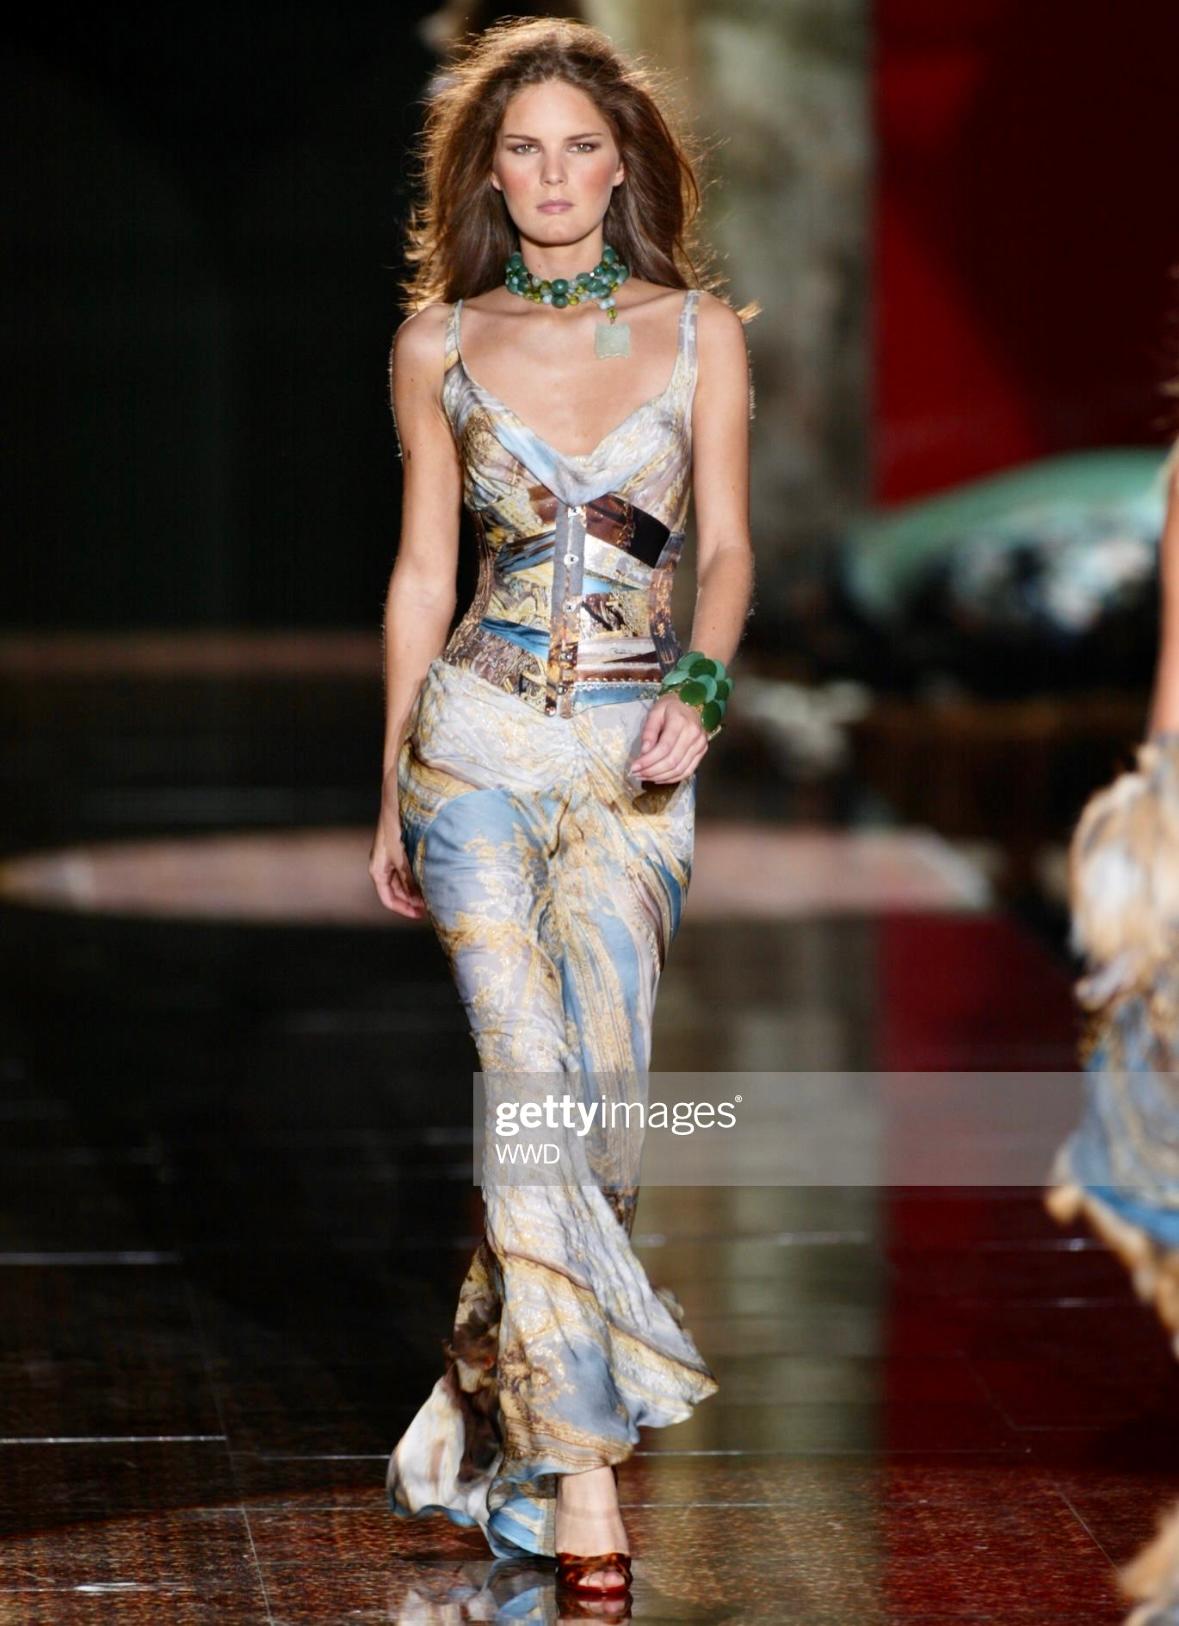 Presenting a fabulous baroque print Roberto Cavalli high-waisted maxi skirt. From the Spring/Summer 2003 collection, this skirt depicts a baroque-style room with musical instruments. Similar prints were featured in the season's runway presentation.